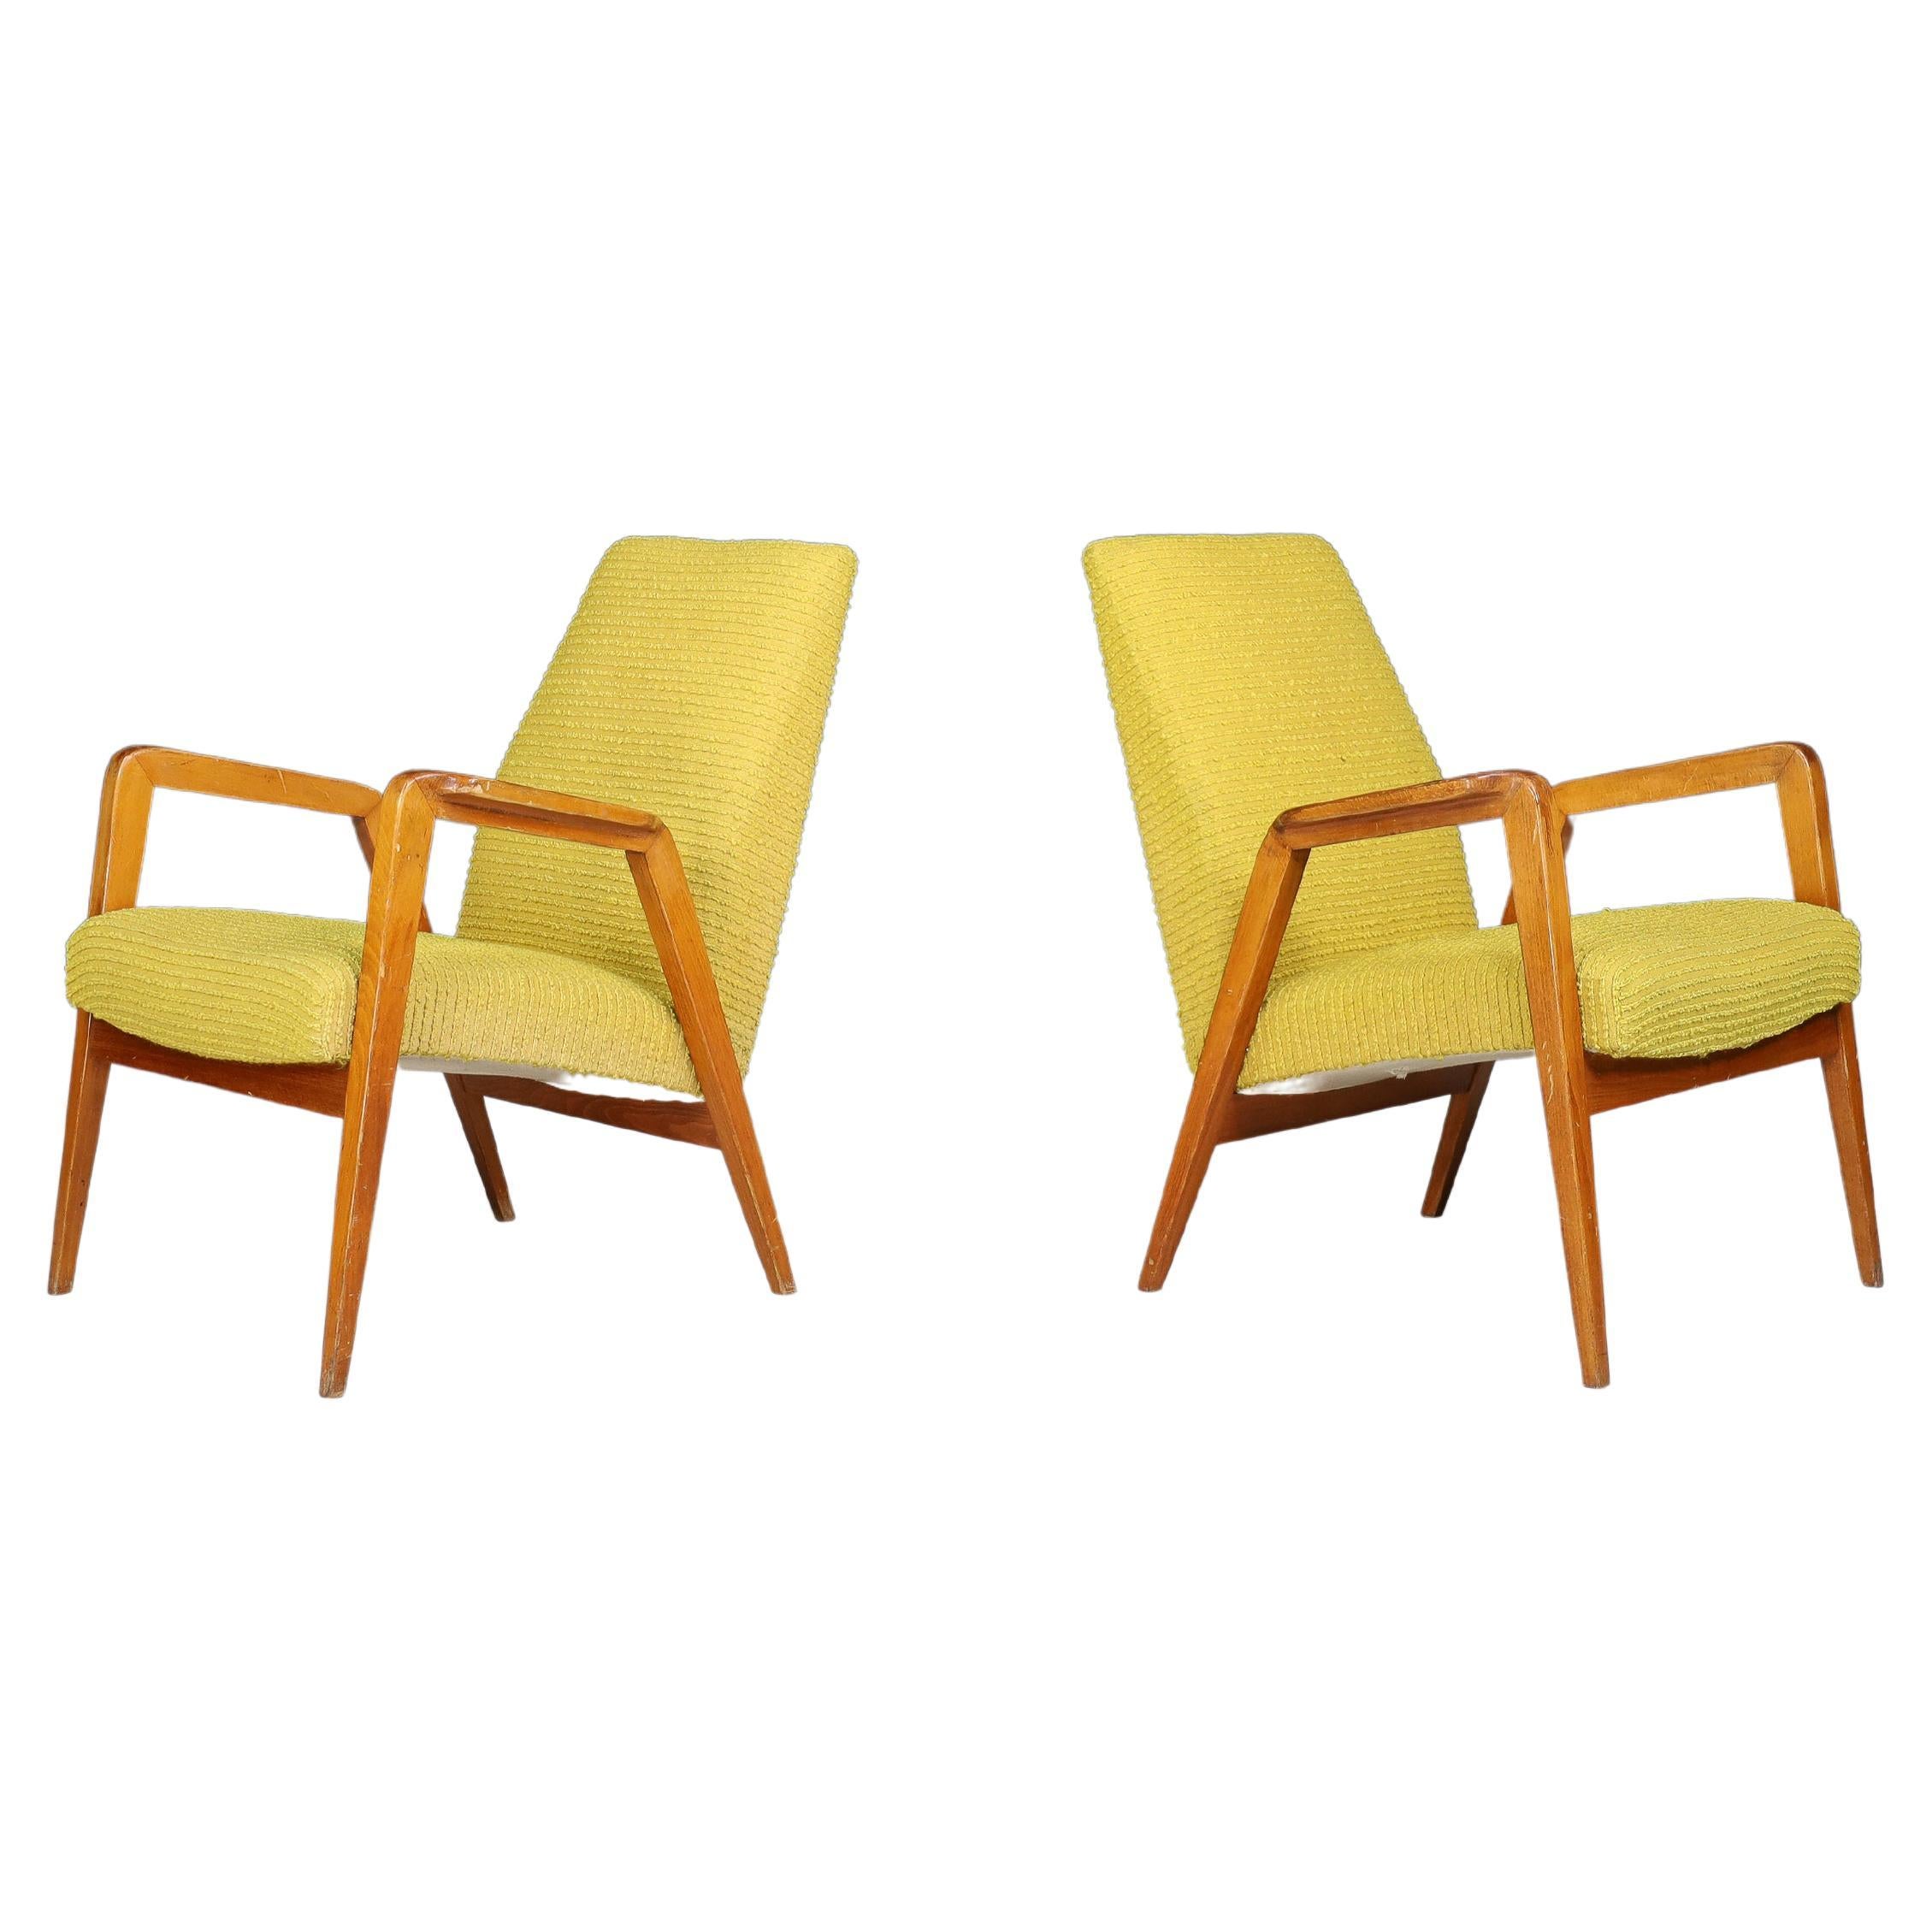 Mid-Century Modern Lounge Chairs in Original Lemon Upholstery, Praque 1950s  For Sale